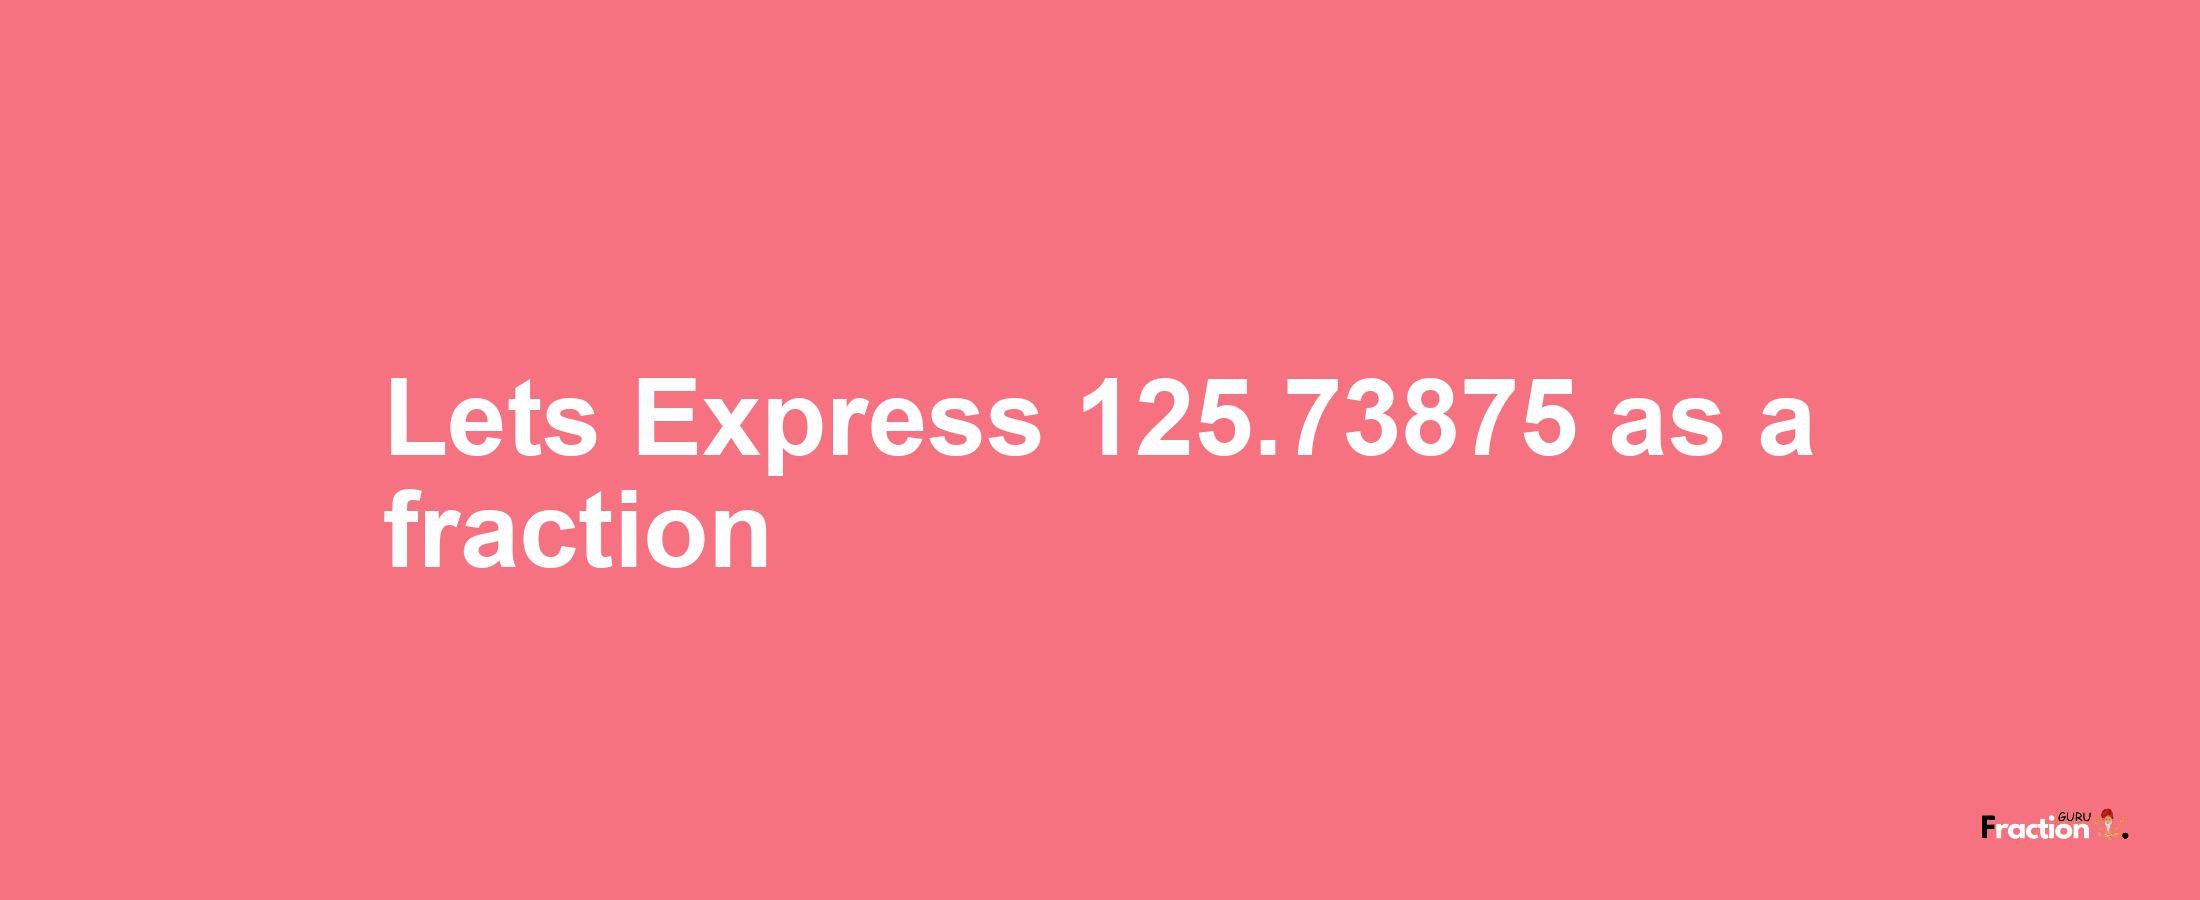 Lets Express 125.73875 as afraction